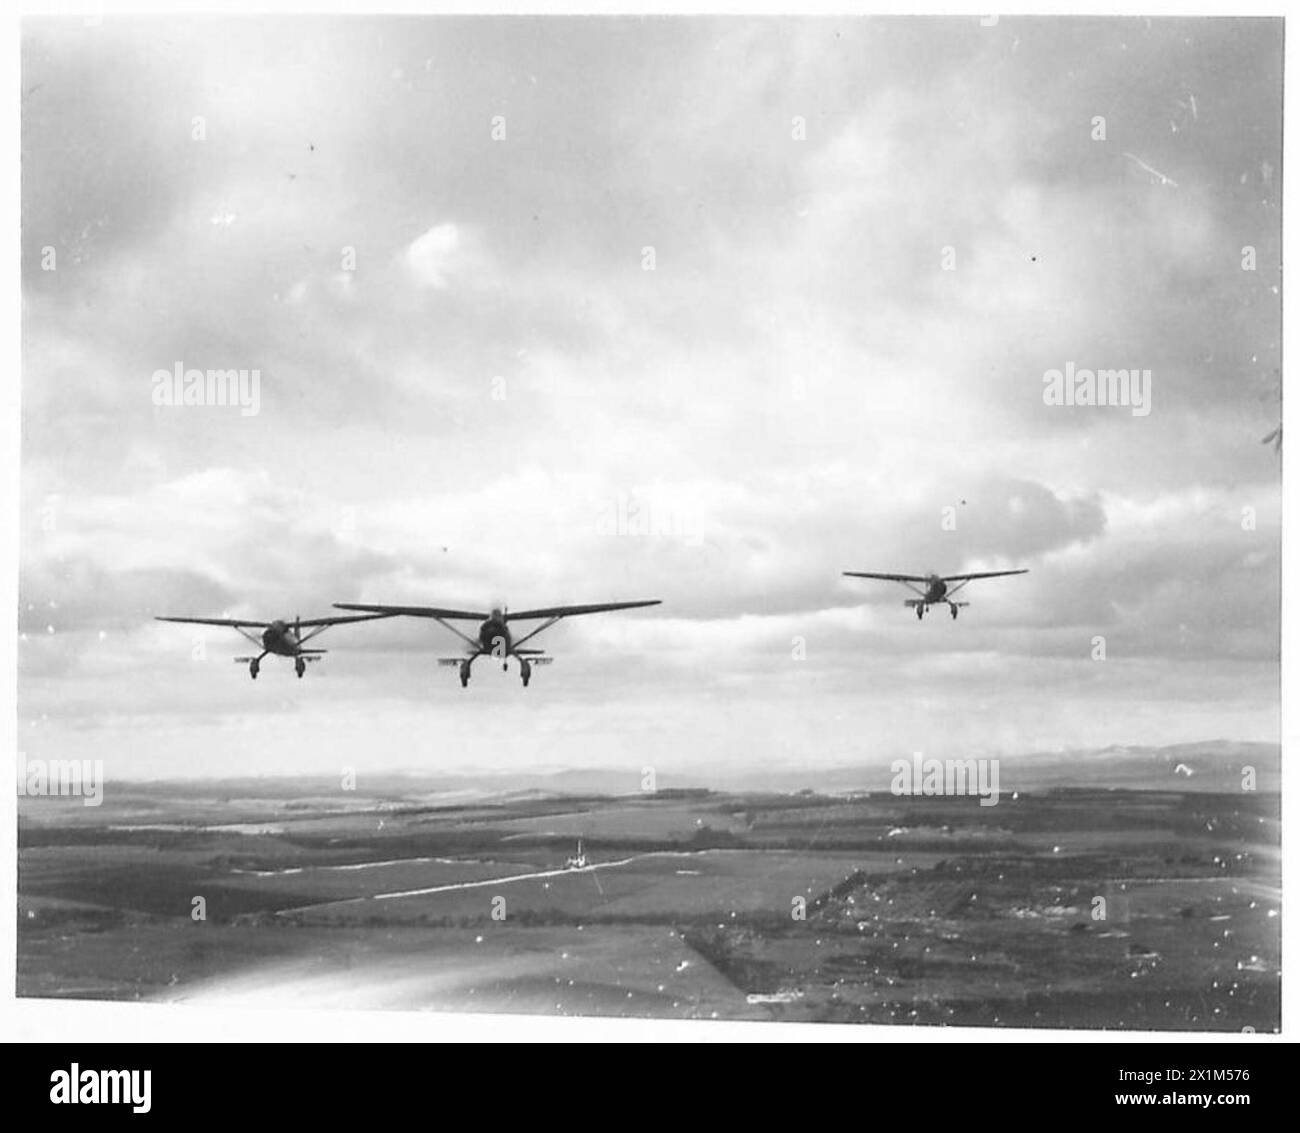 THE POLISH AIR FORCE IN BRITAIN, 1940-1947 - Three Westland Lysander Mark IIIAs of No. 309 Polish Fighter-Reconnaissance Squadron (part of the RAF Army Cooperation Command), based at Dunino, Fife, on a photo reconnaissance training sortie over Scottish landscape, Polish Air Force, Polish Air Force, 309 'Land of Czerwień' Fighter-Reconnaissance Squadron, Royal Air Force, Station, Calveley Stock Photo